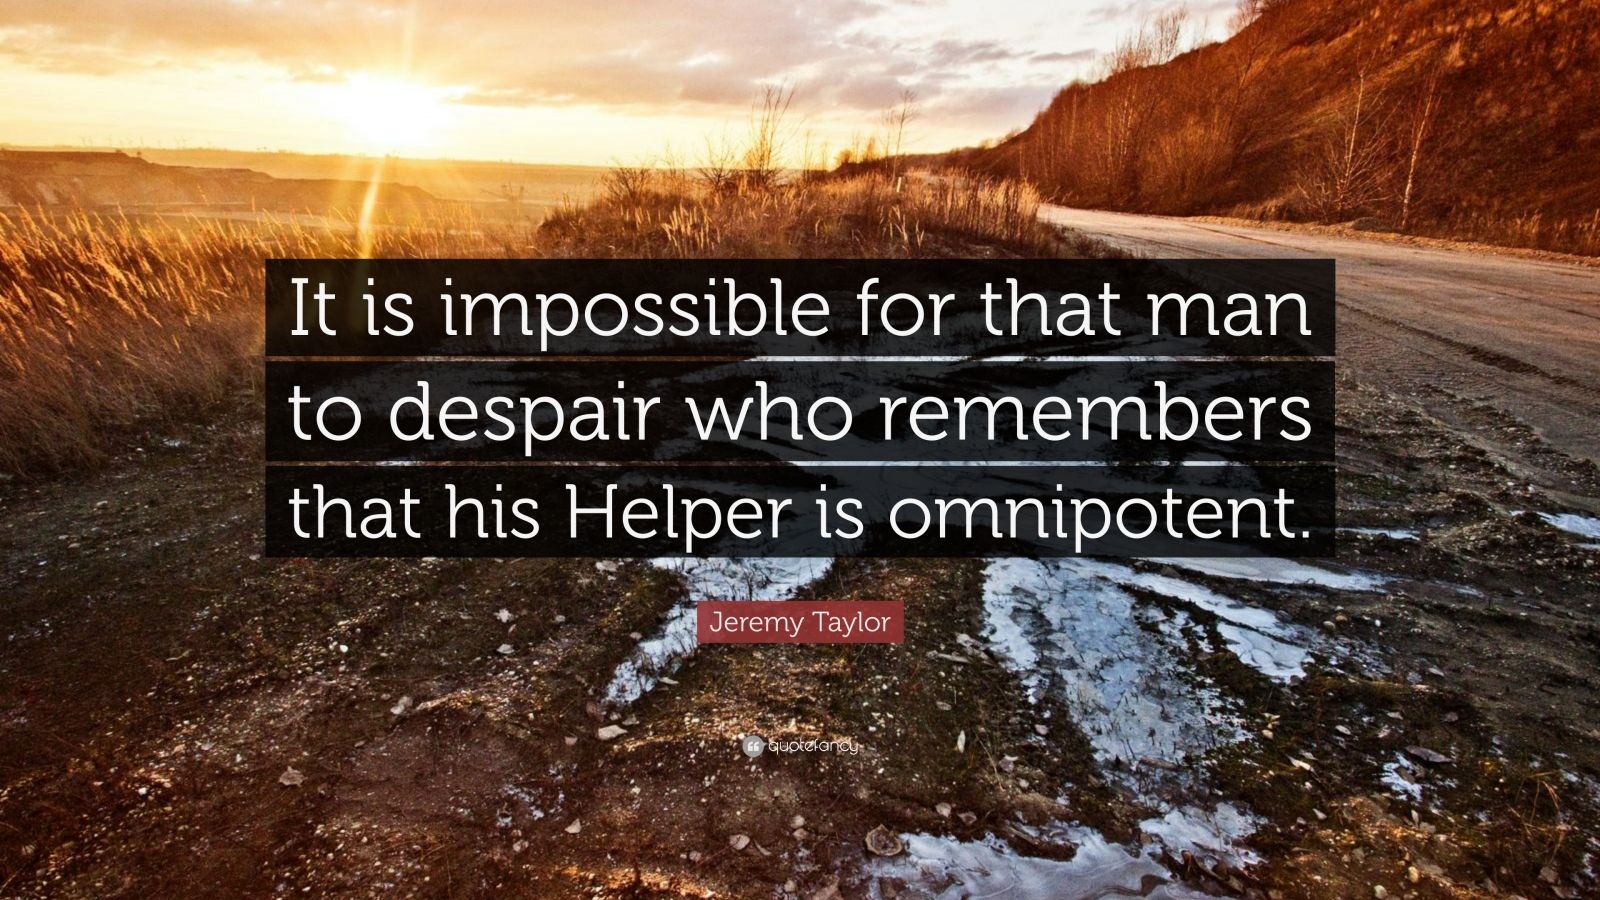 Jeremy Taylor Quote “it Is Impossible For That Man To Despair Who